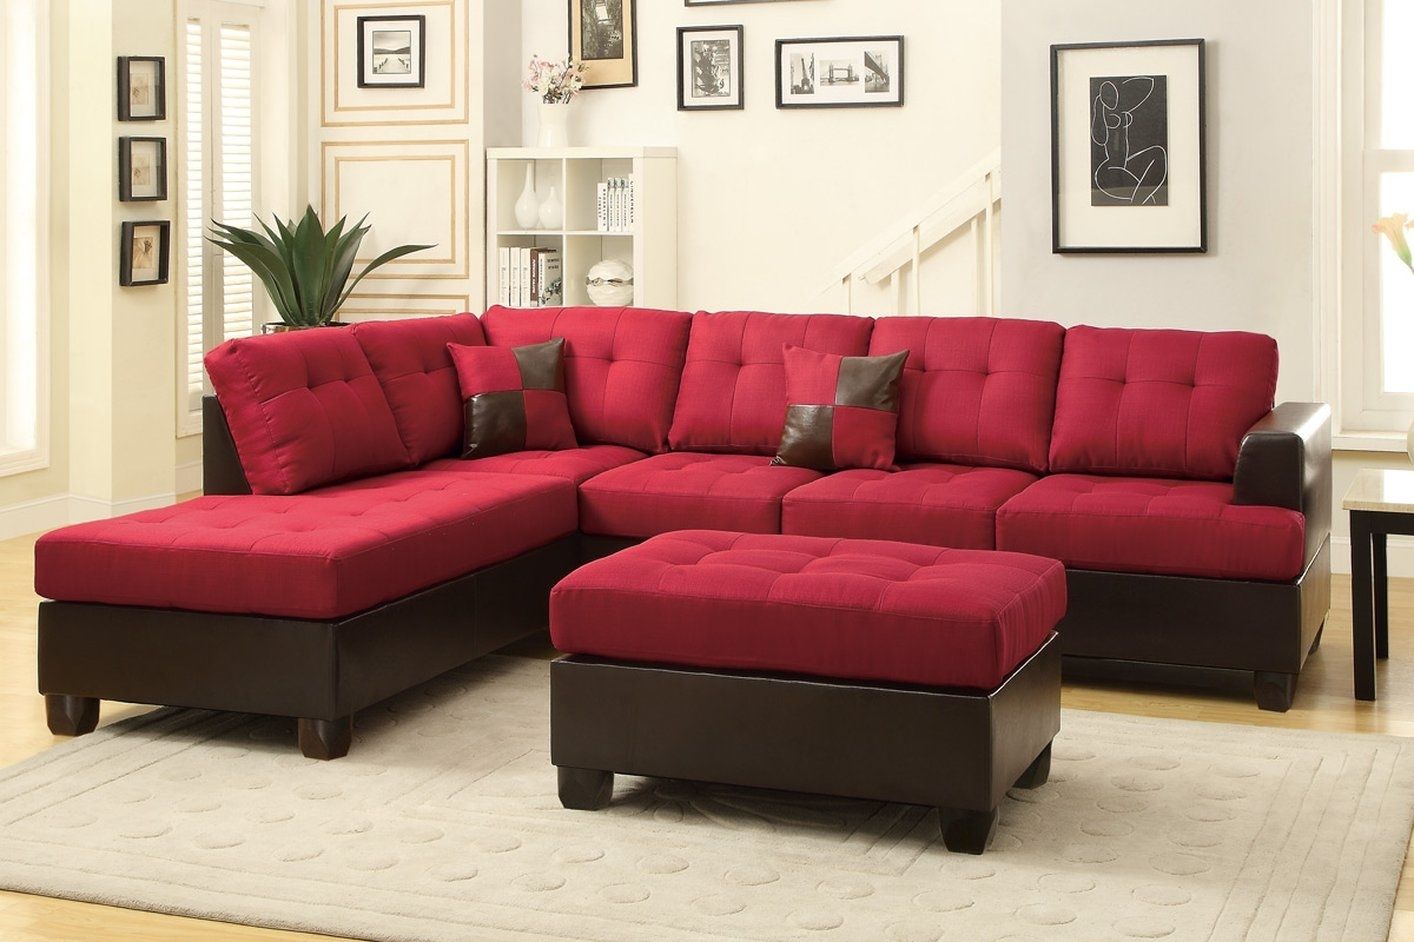 The Most Popular Red And Black Sectional Sofa 31 About Remodel For Red Black Sectional Sofas (View 7 of 10)